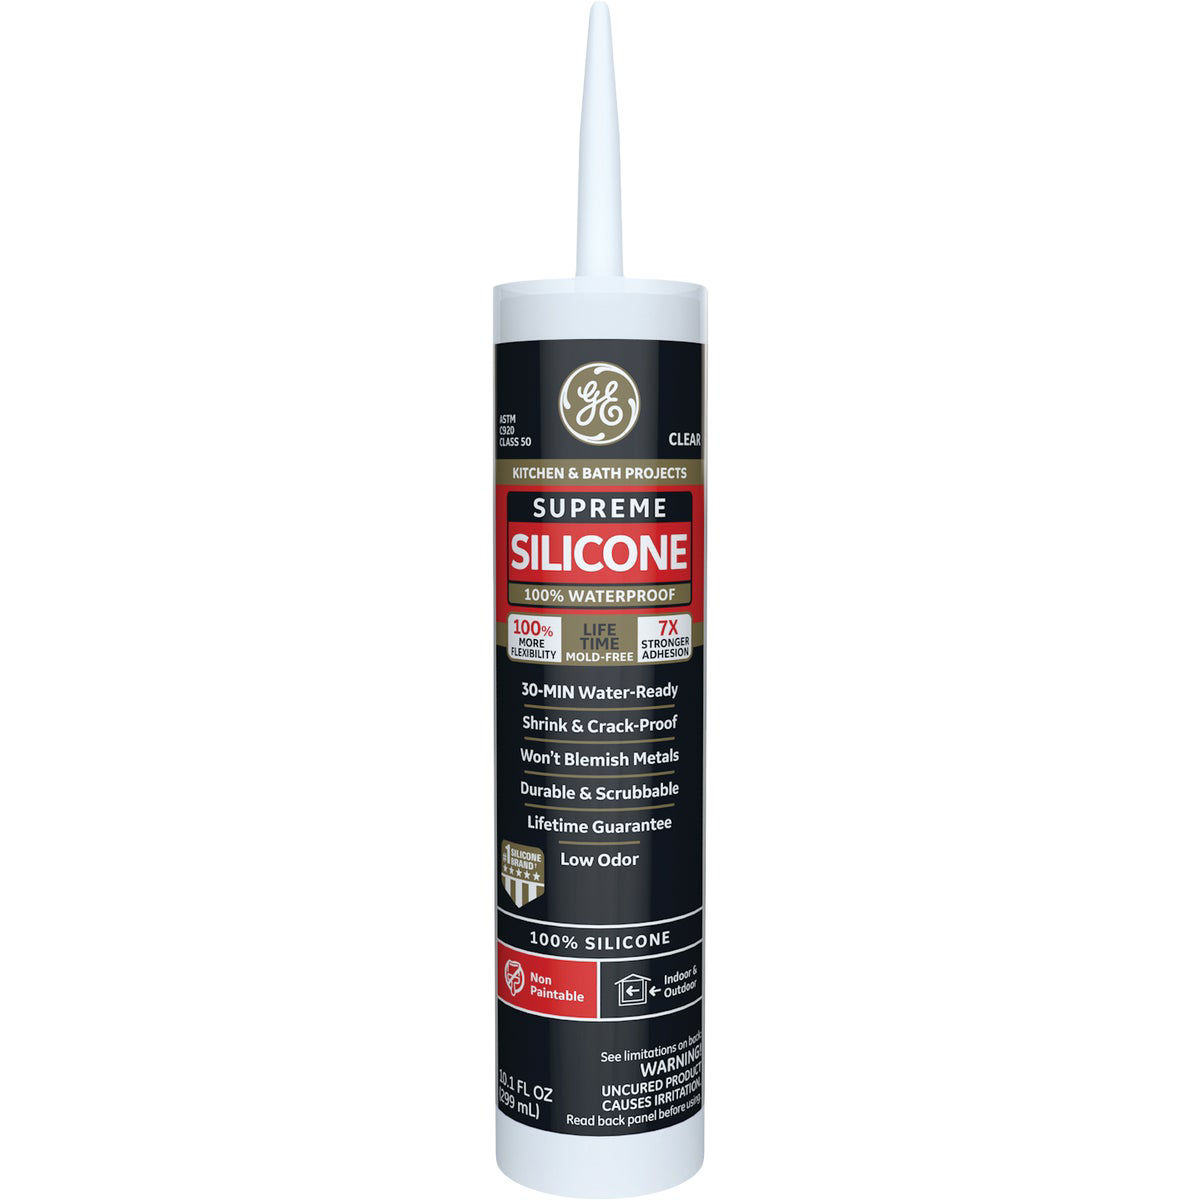 Dap Silicone Max Window And Door 2.8oz Clear : Target